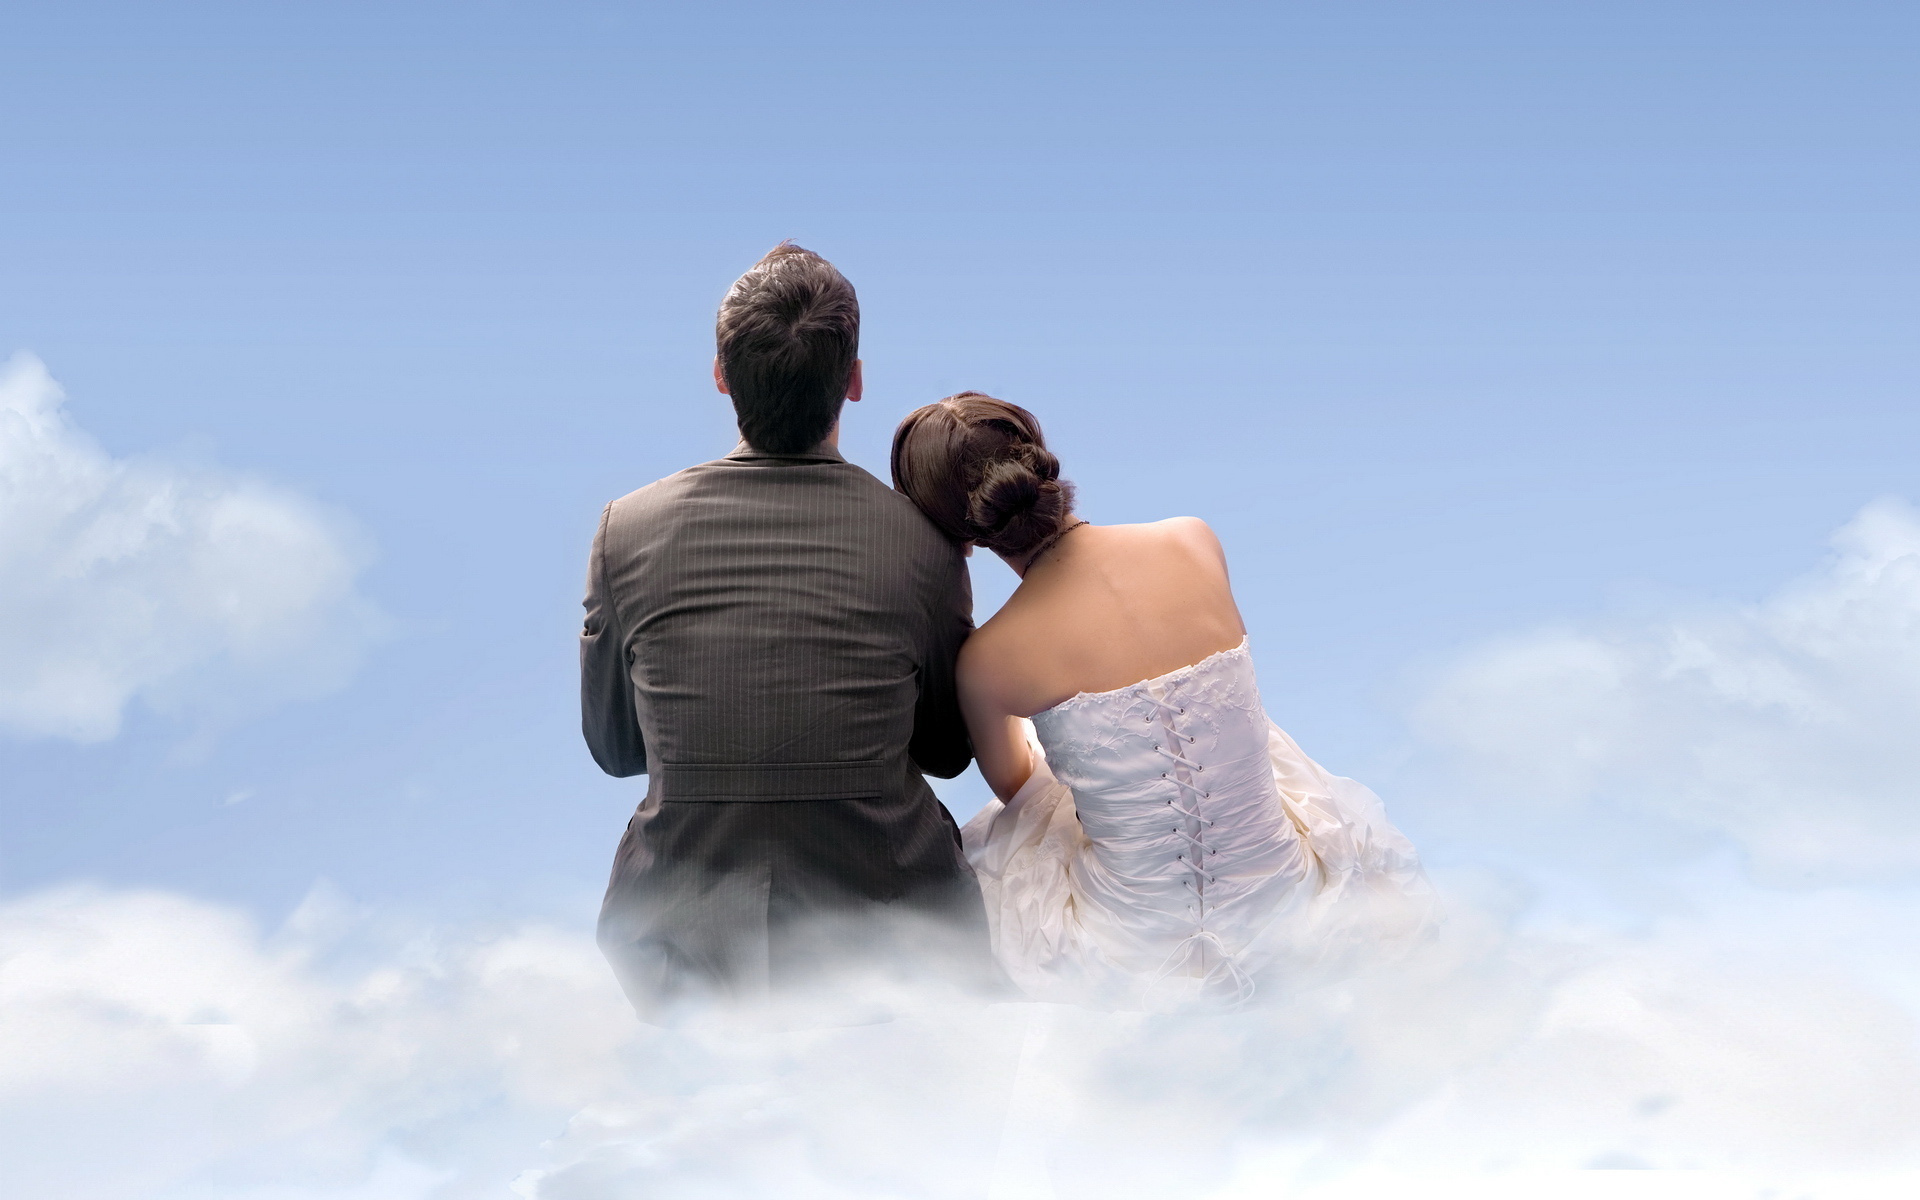 sweet couple wallpaper,photograph,sky,cloud,happy,photography